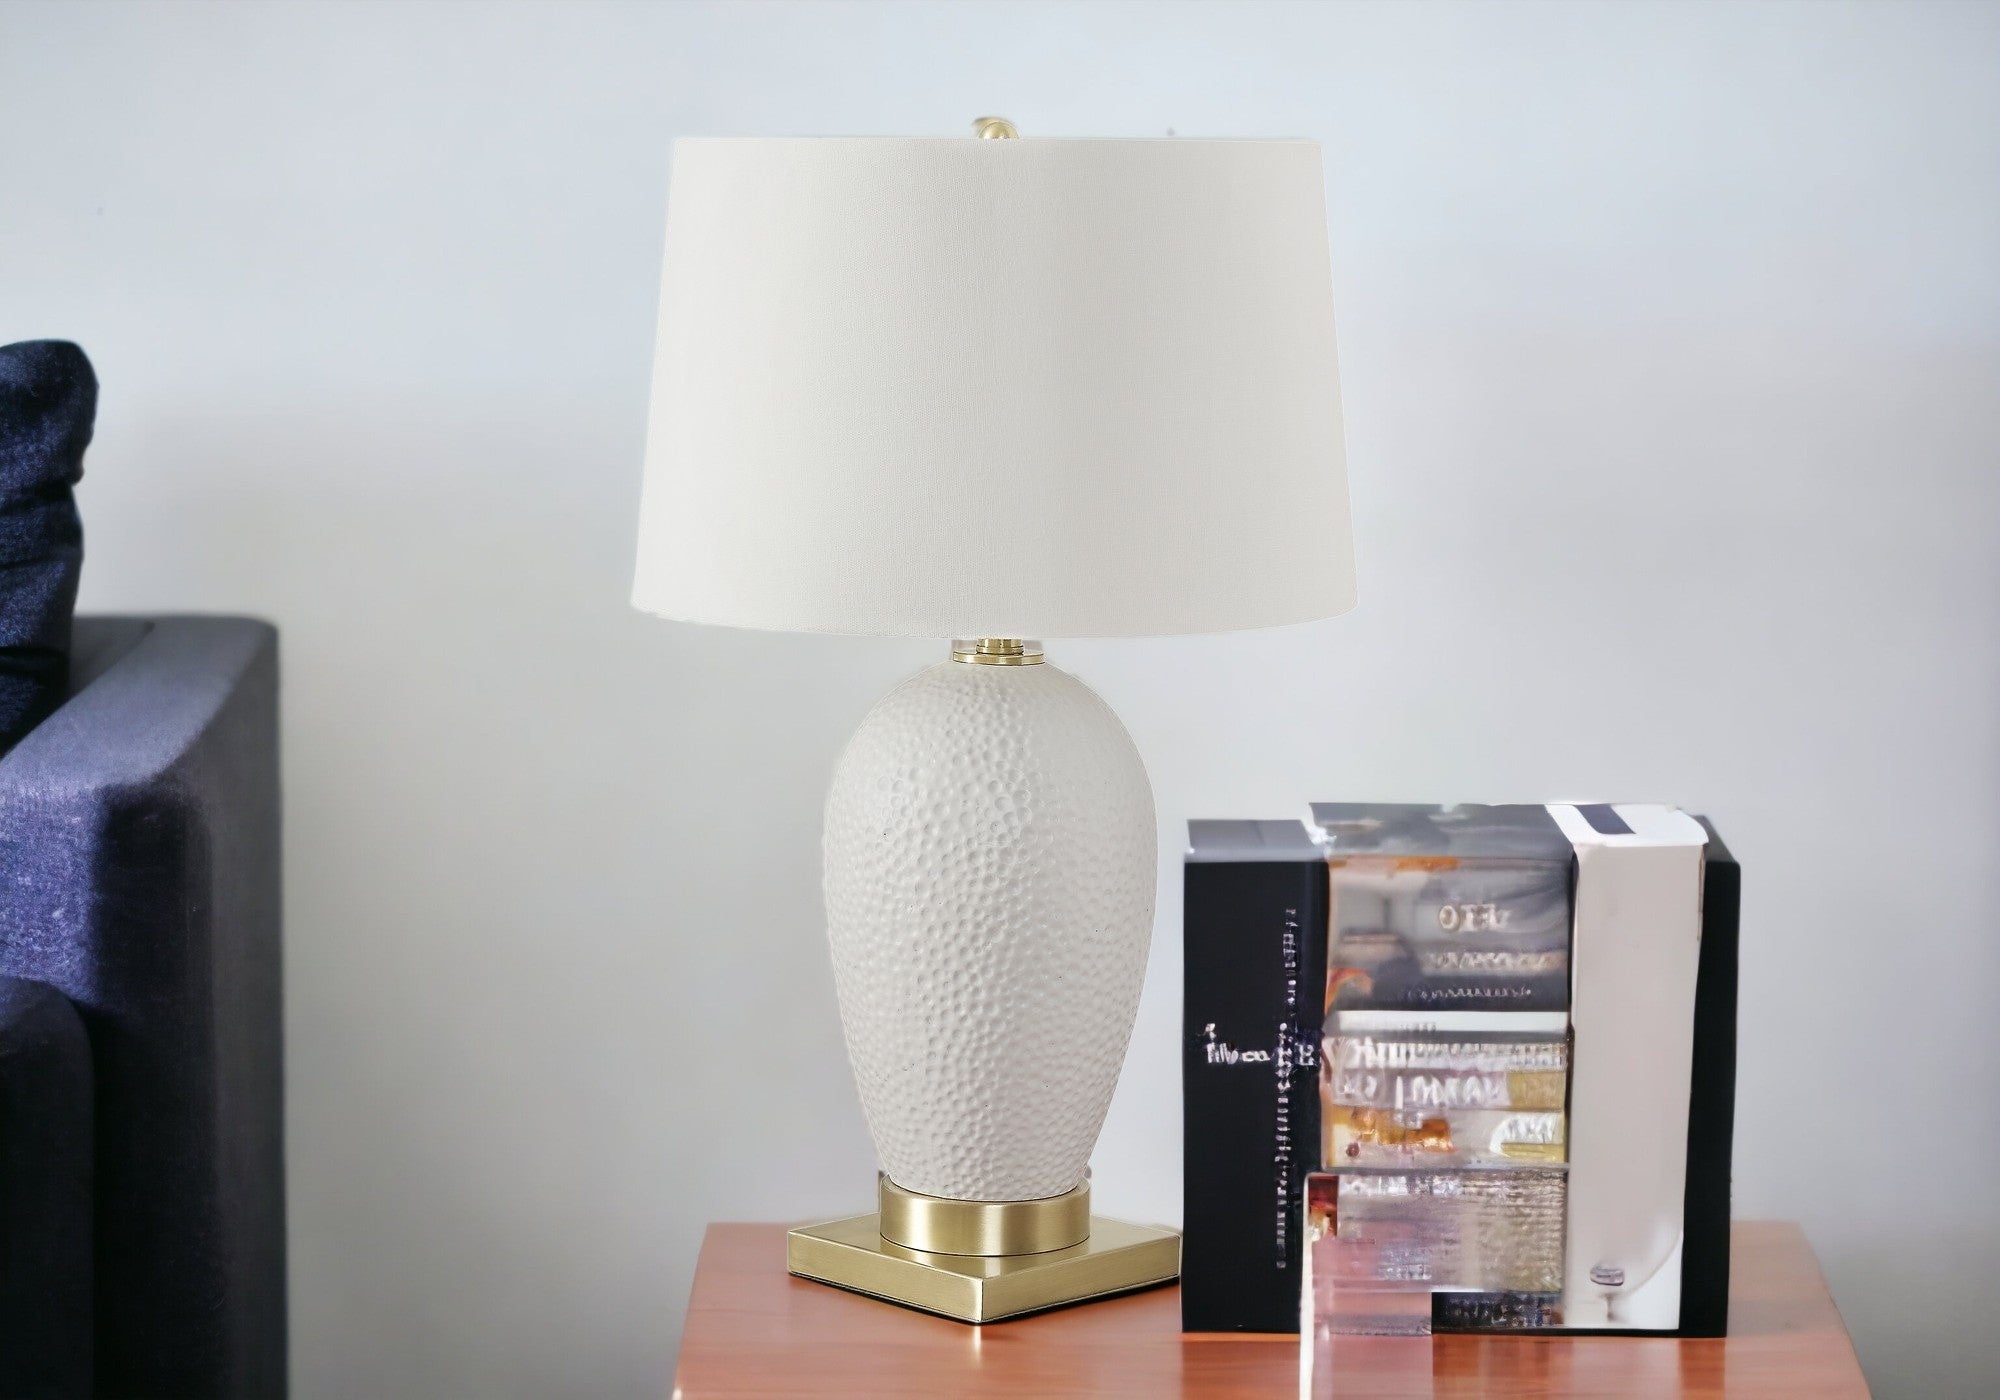 26" Gold and White Ceramic Urn Table Lamp With Cream Empire Shade